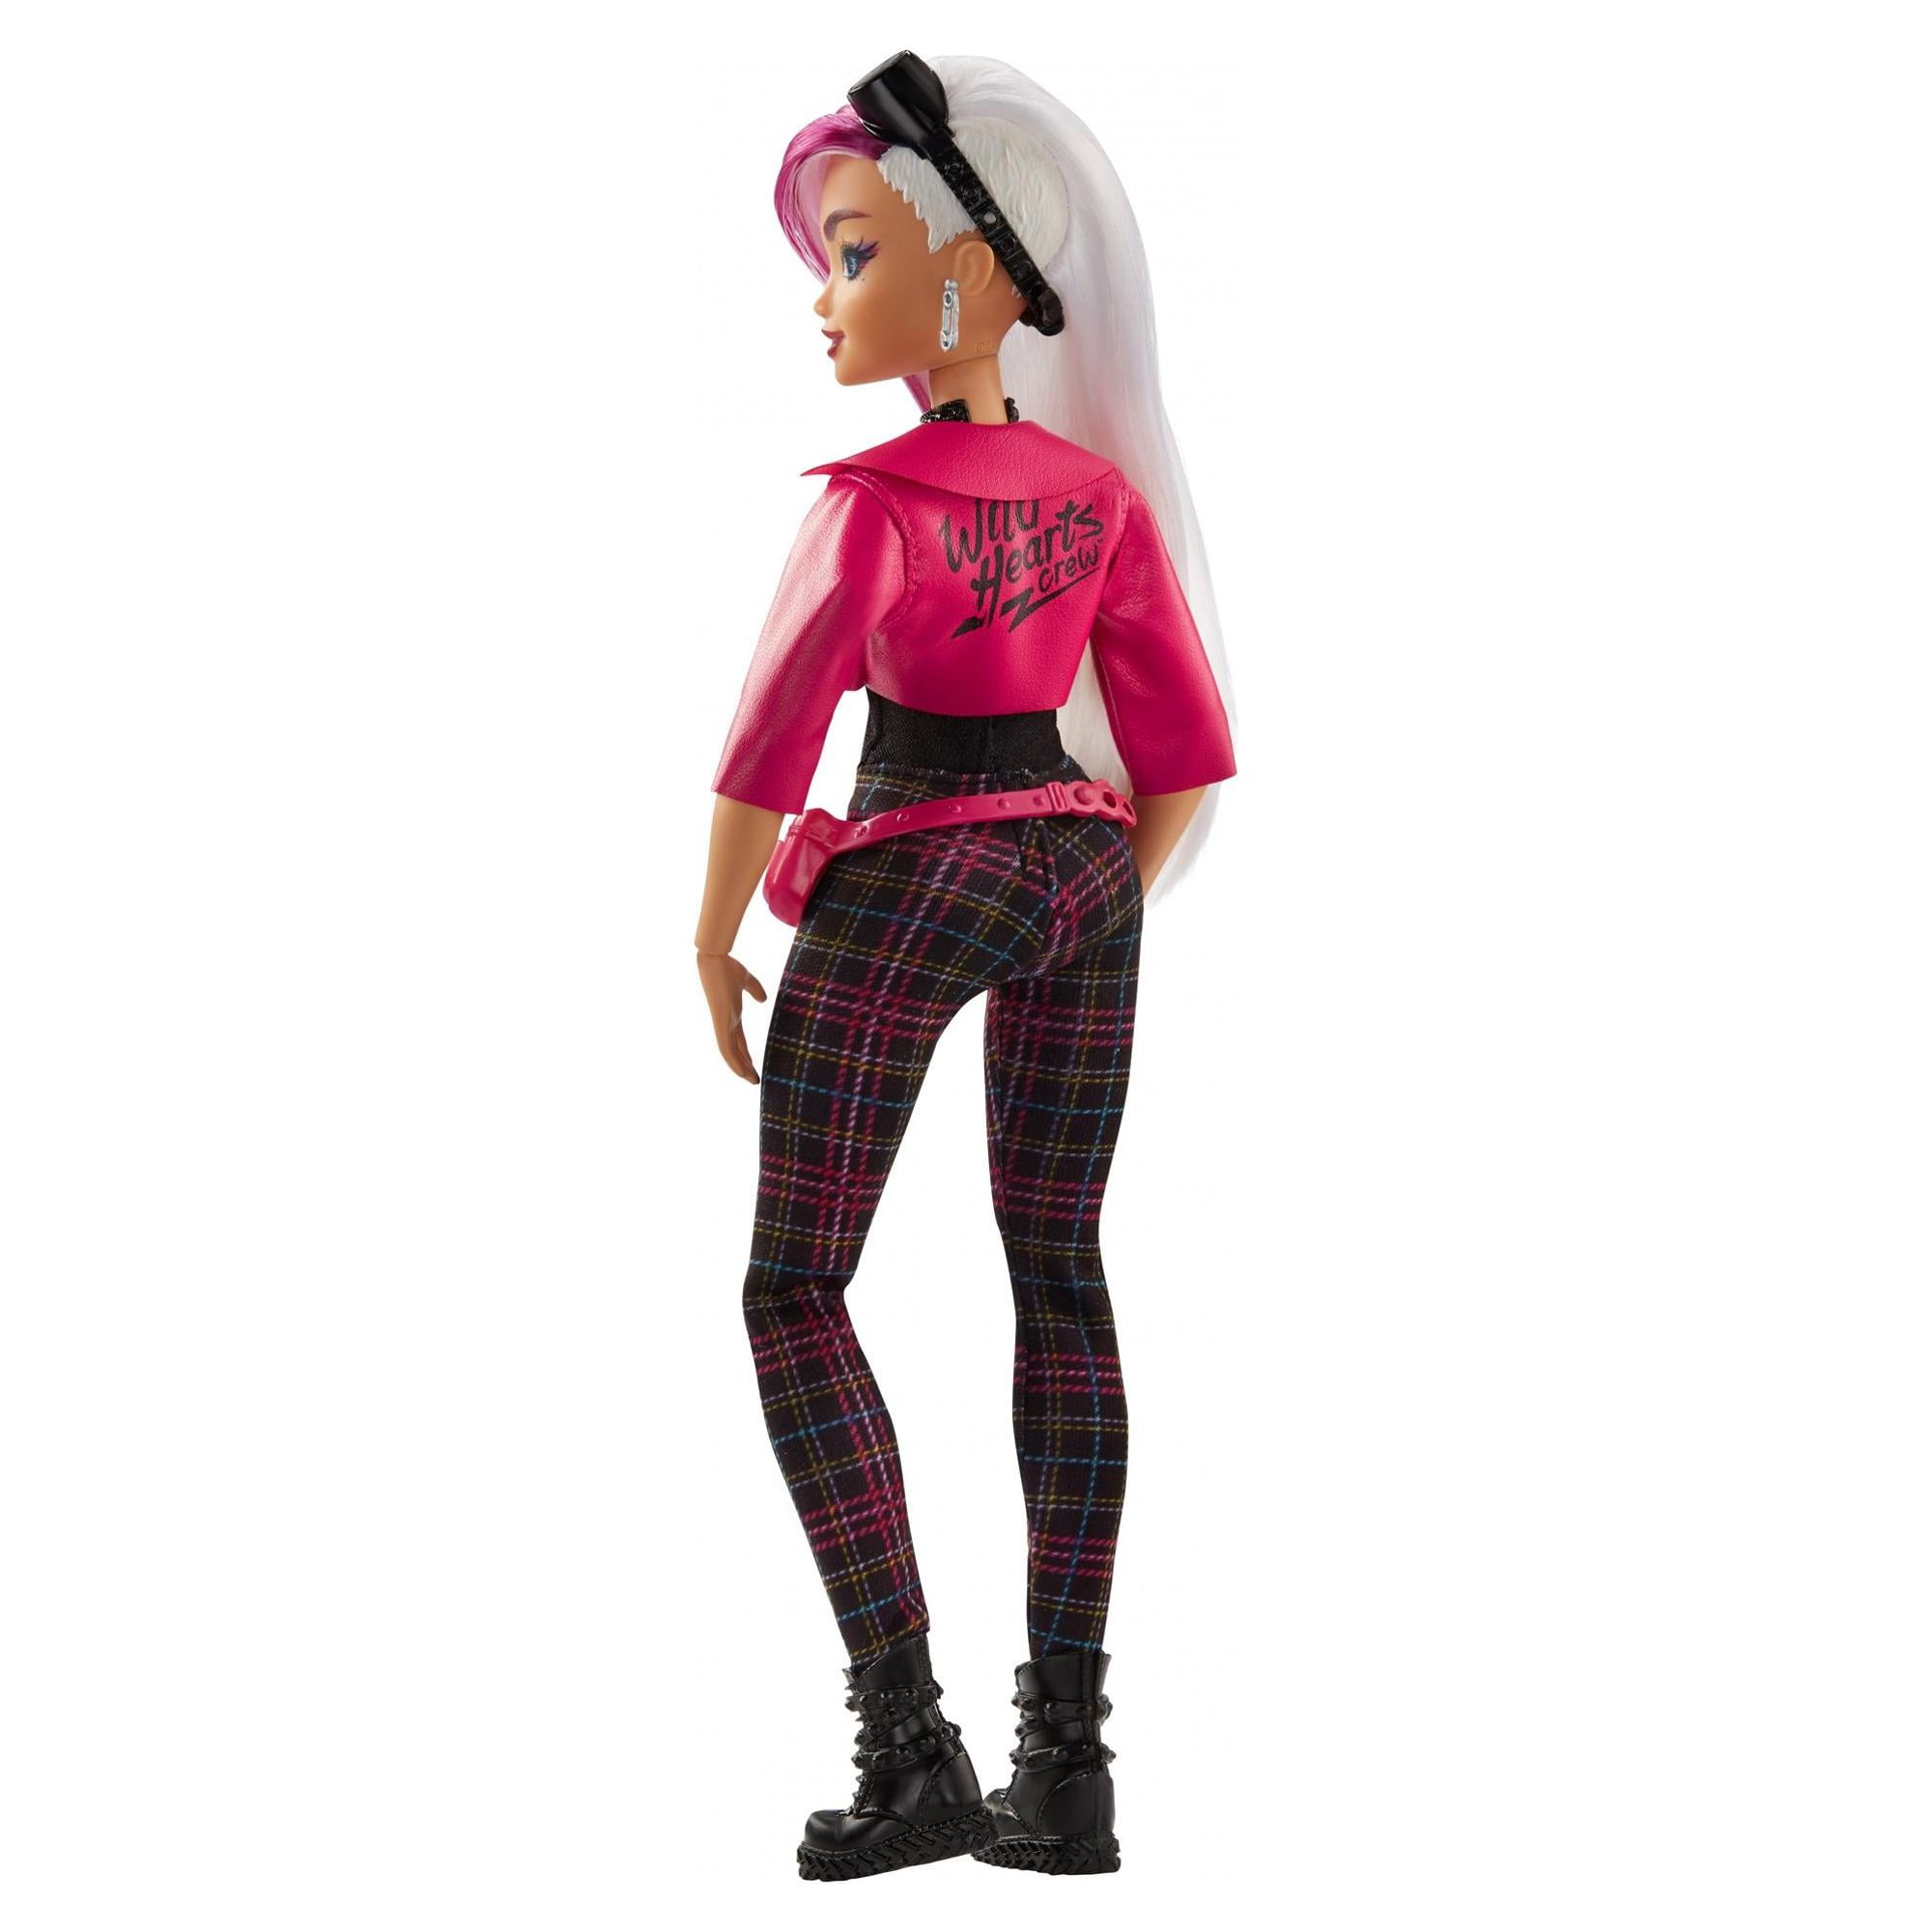 Wild Hearts Crew Rallee Radmore Doll with Style Accessories - image 8 of 10